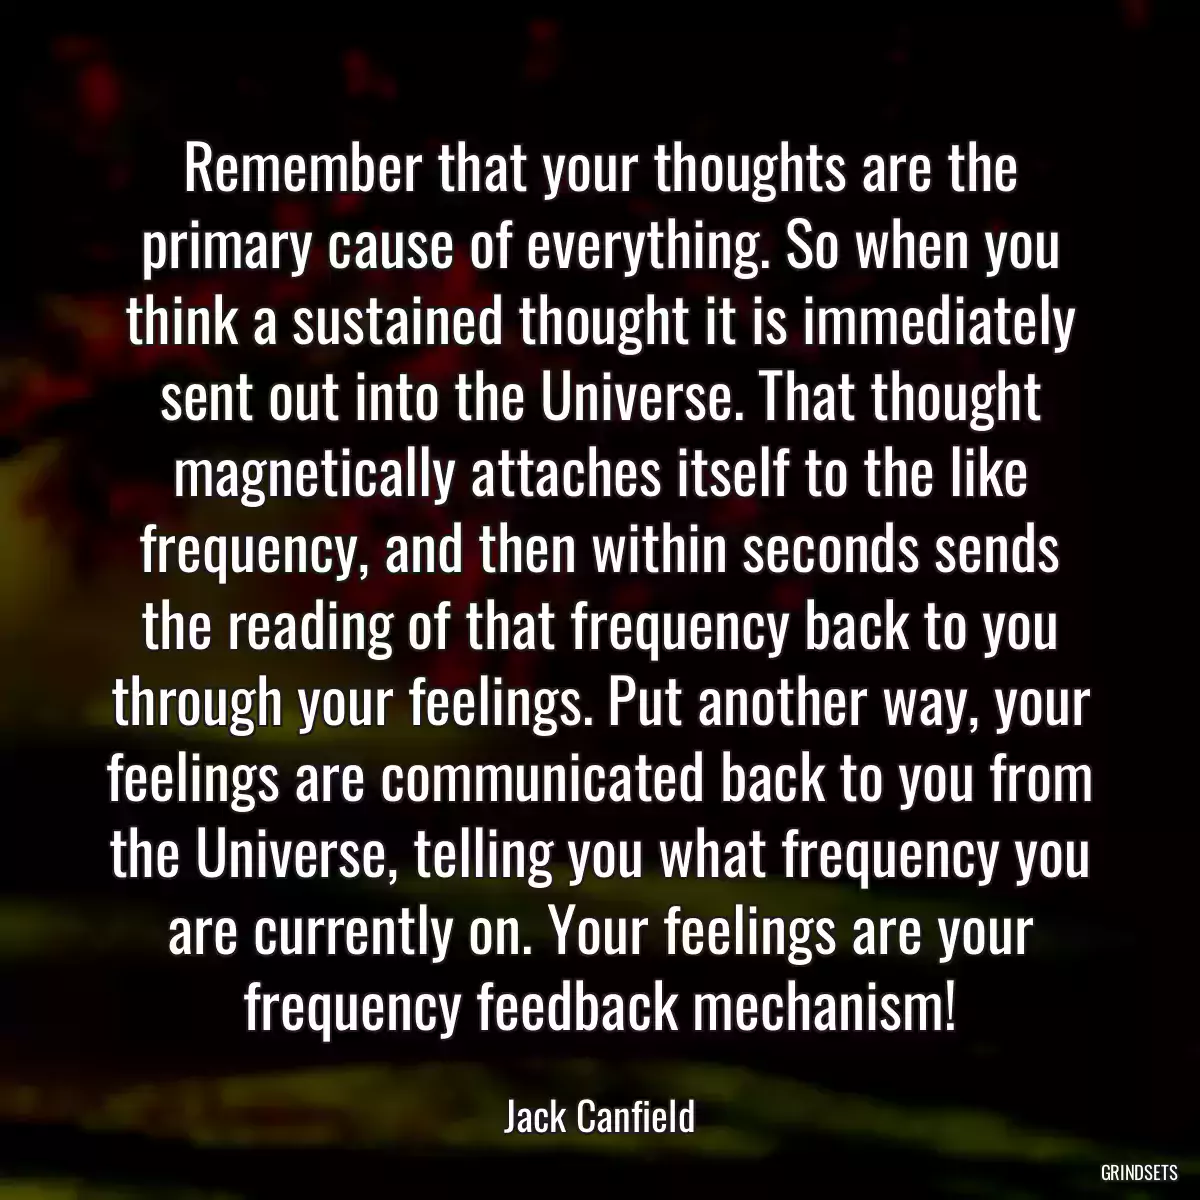 Remember that your thoughts are the primary cause of everything. So when you think a sustained thought it is immediately sent out into the Universe. That thought magnetically attaches itself to the like frequency, and then within seconds sends the reading of that frequency back to you through your feelings. Put another way, your feelings are communicated back to you from the Universe, telling you what frequency you are currently on. Your feelings are your frequency feedback mechanism!